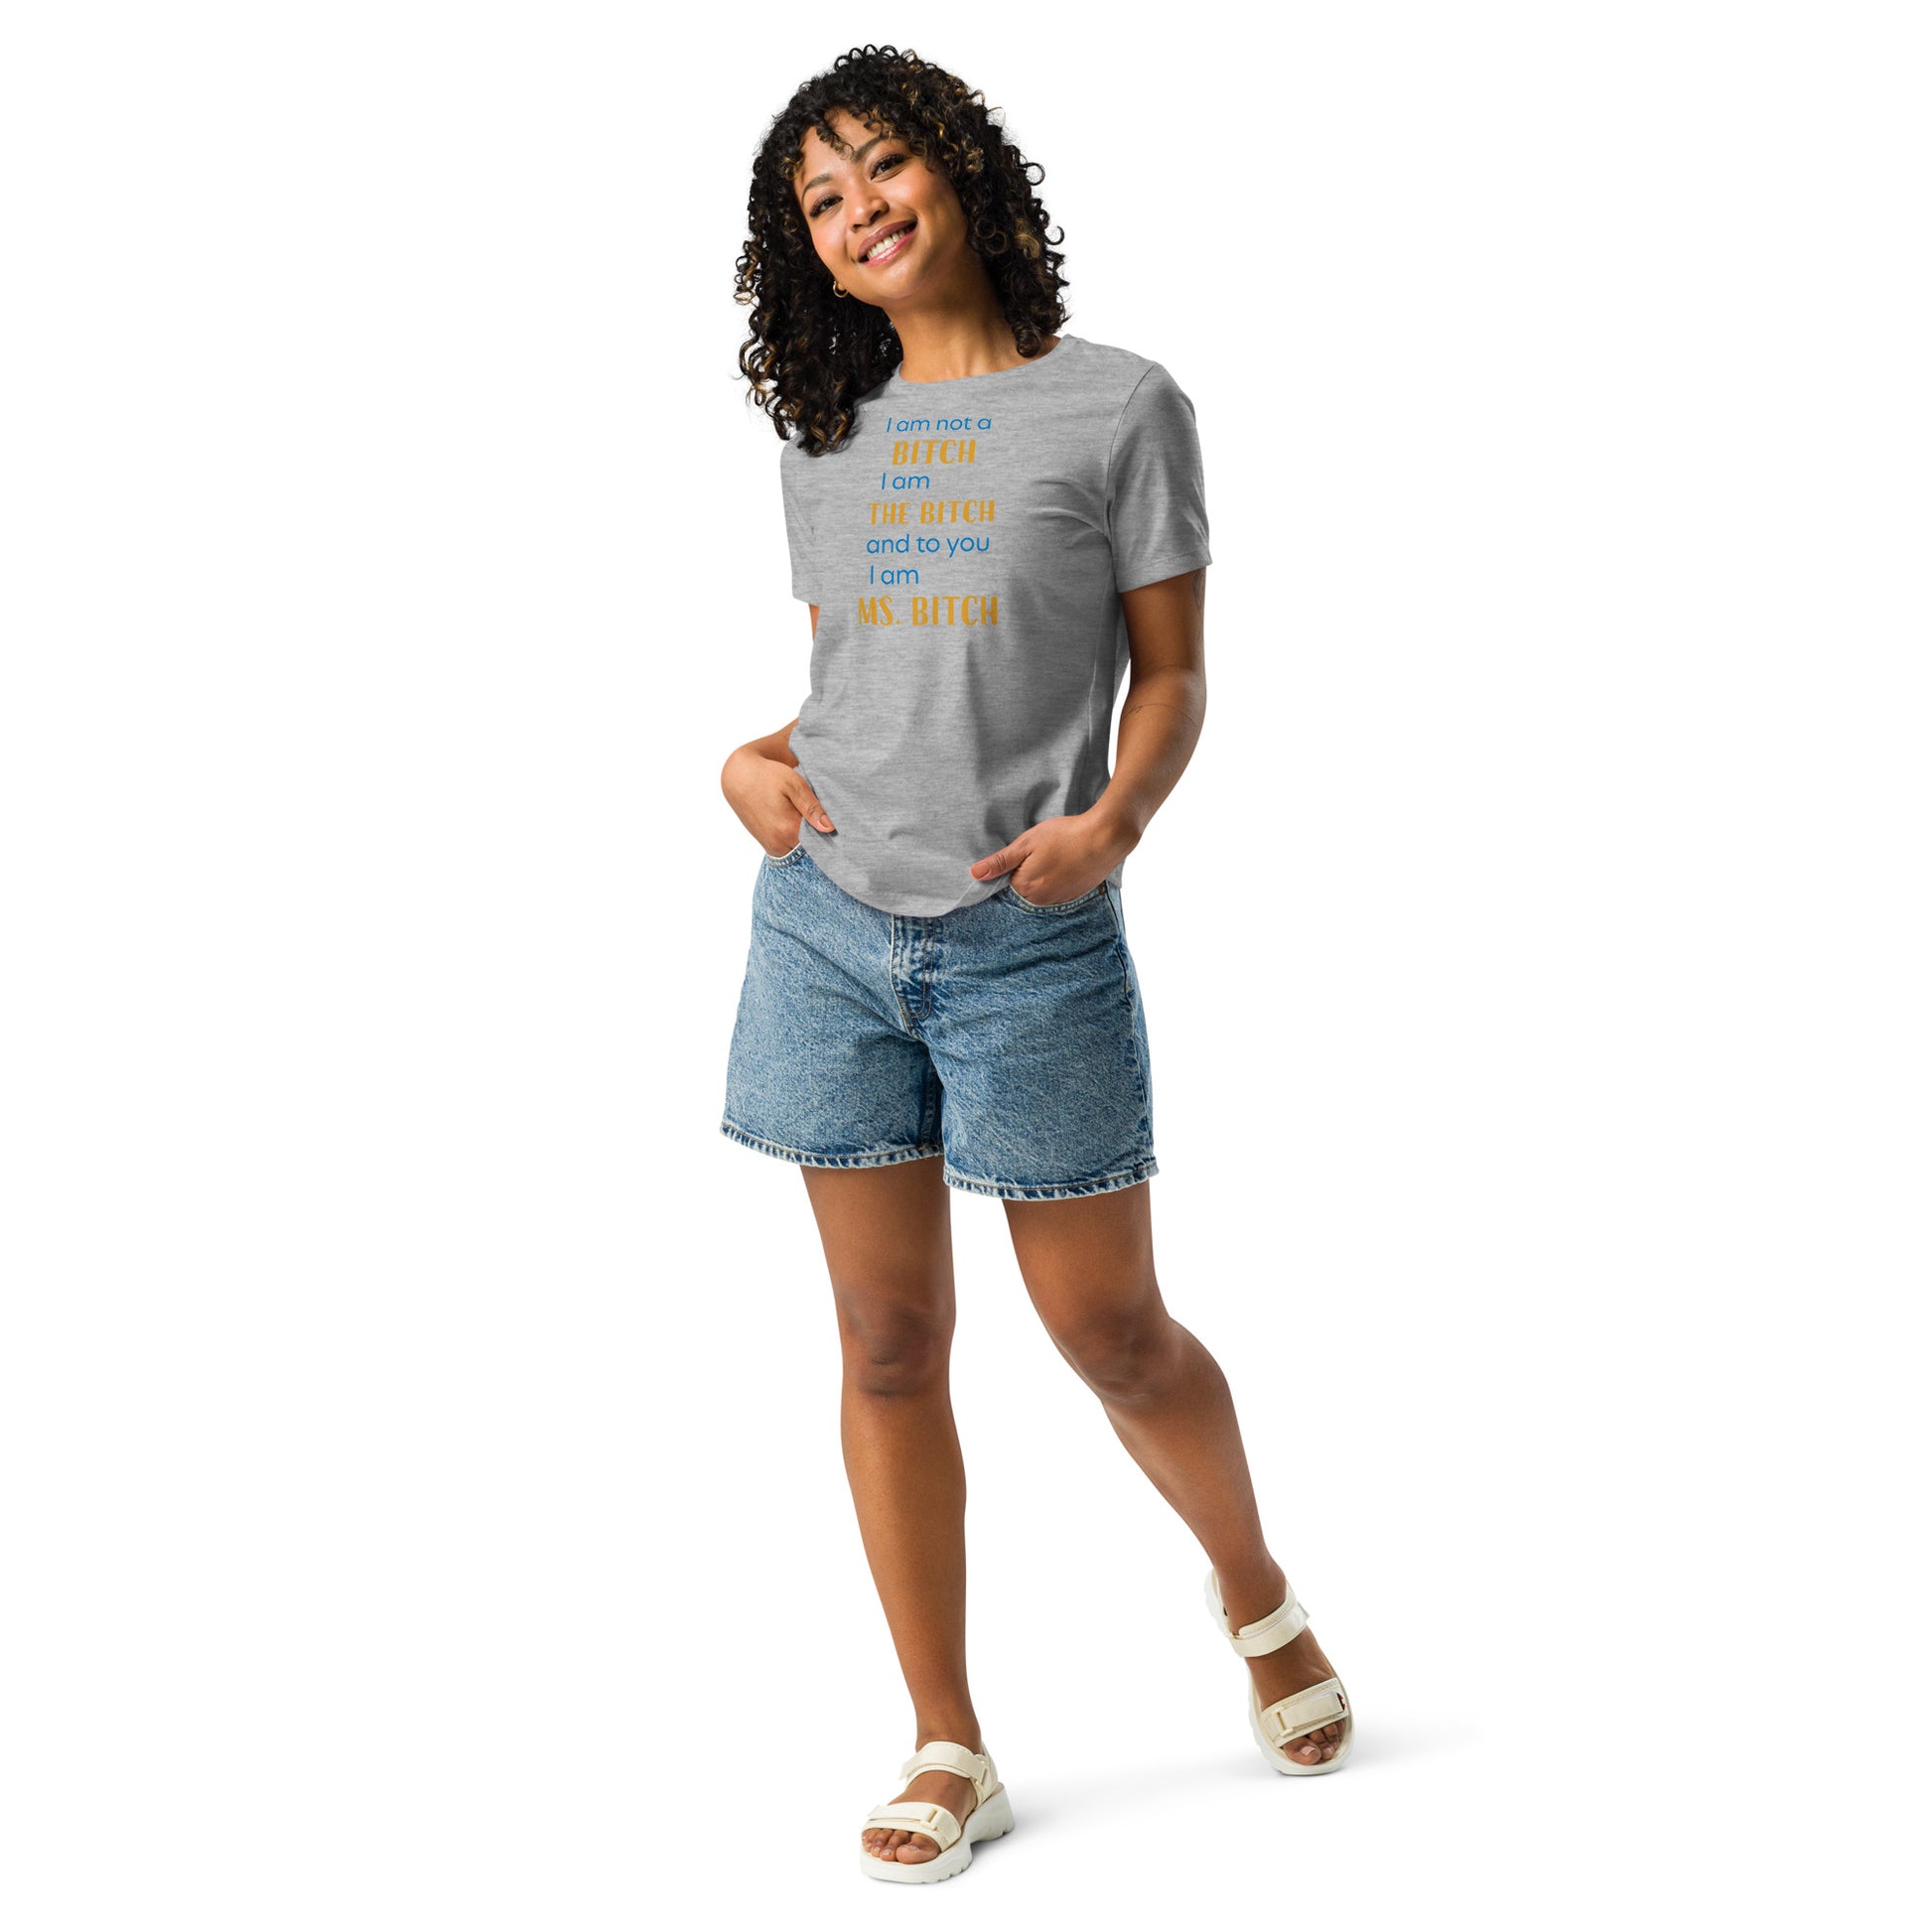 Women with grey t-shirt with the text "to you I'm MS bitch"